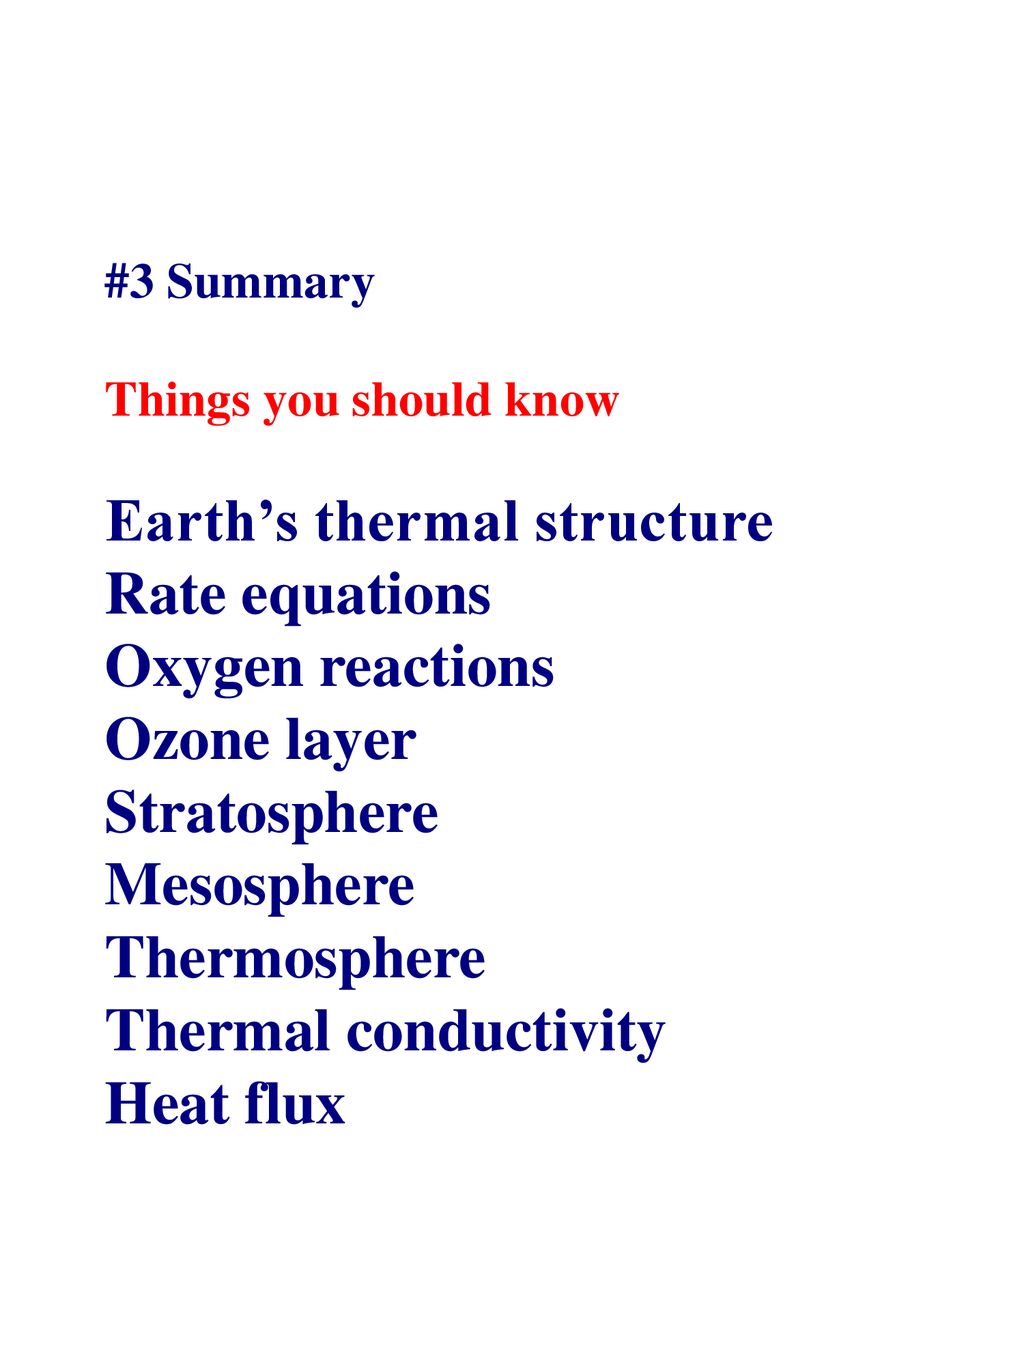 Earth’s thermal structure Rate equations Oxygen reactions Ozone layer